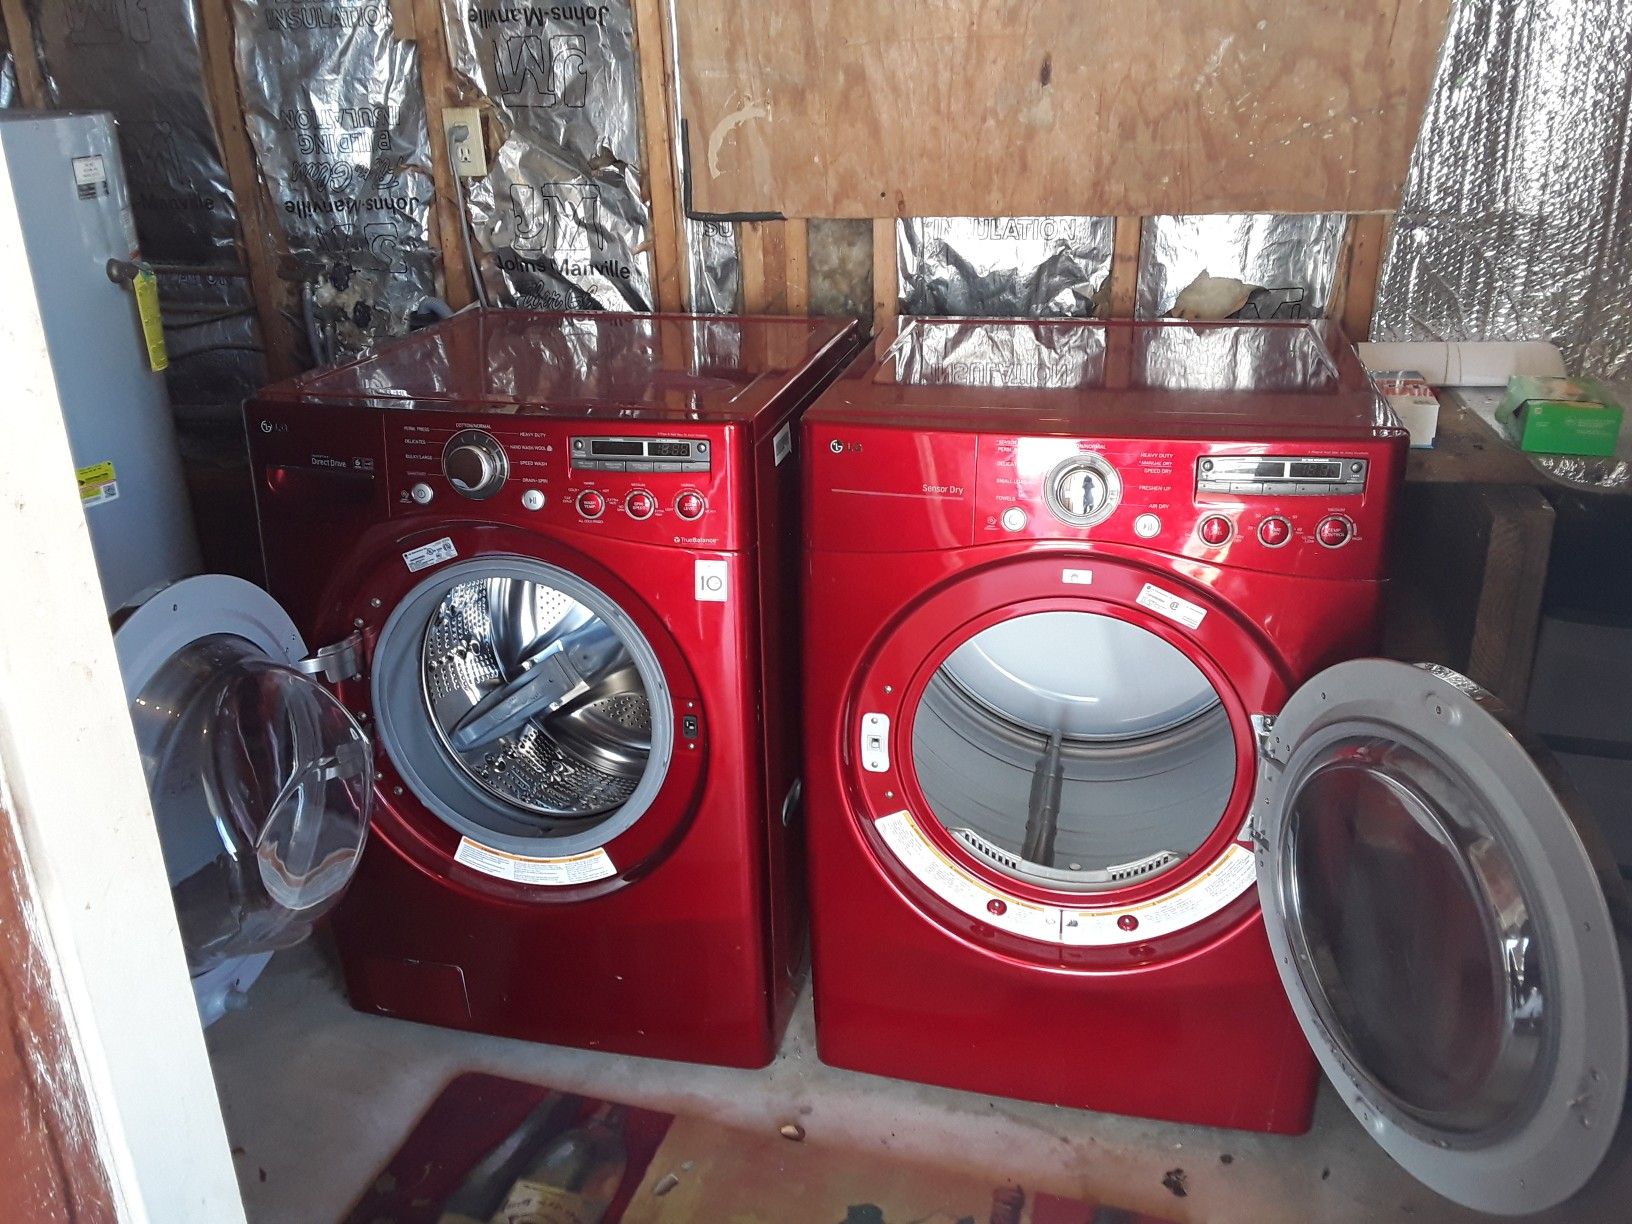 LIMITED EDITION LG WASHER AND DRYER